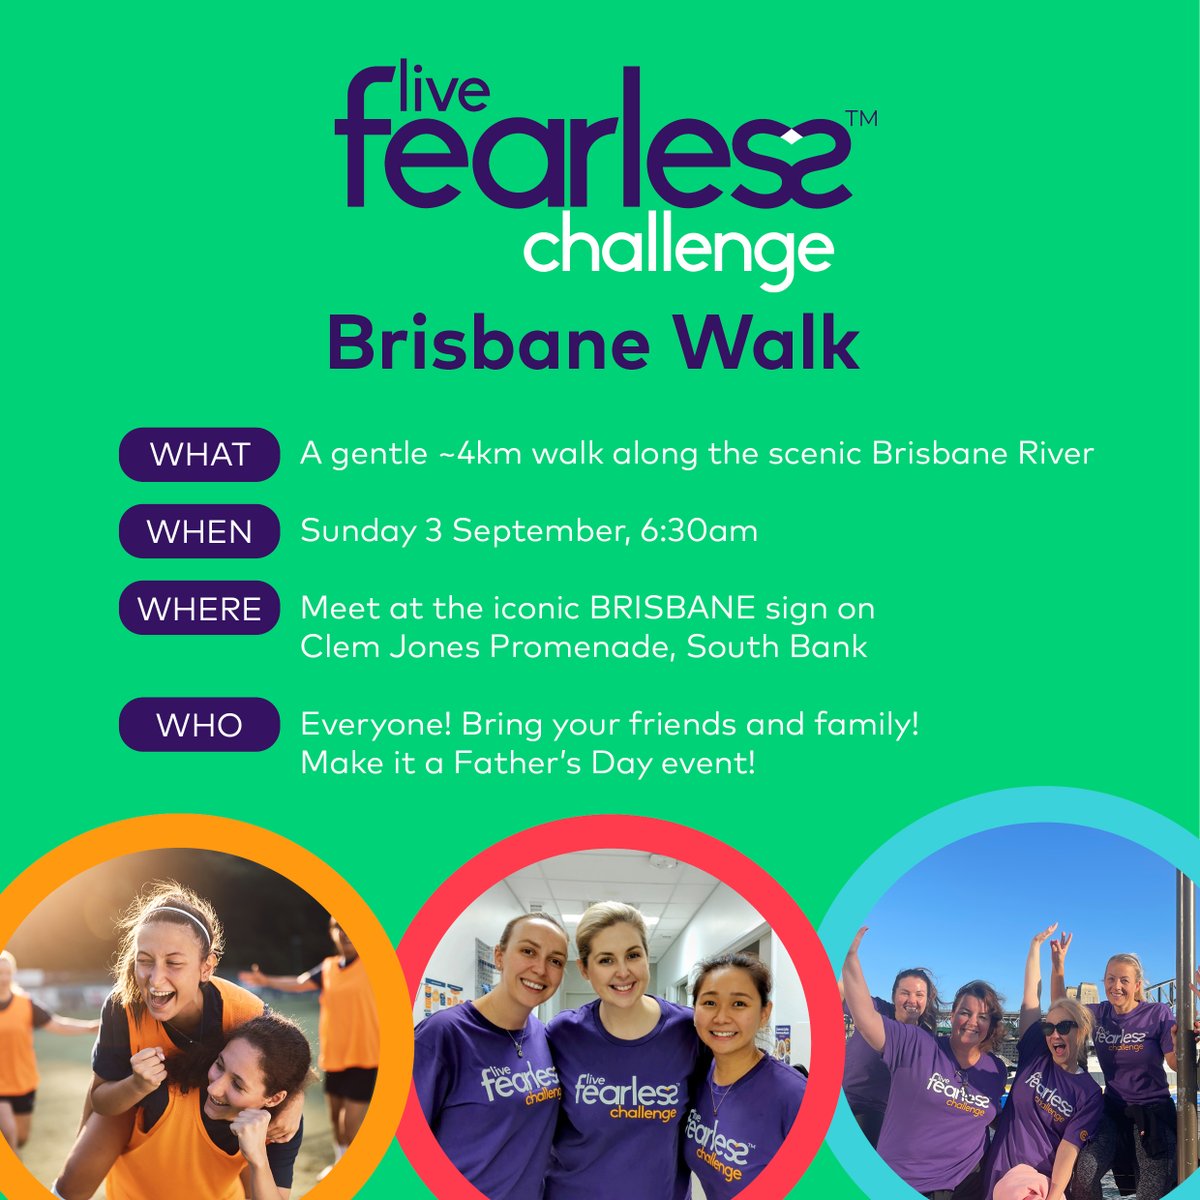 👋 Brisbane 👋 Don't miss our special walk along the scenic Brisbane River to kick-off this year’s #LiveFearlessChallenge. Bring your friends and family with you on Sunday 3 September for a 6:30am start. Find out more: livefearlesschallenge.com.au/blog/live-fear…